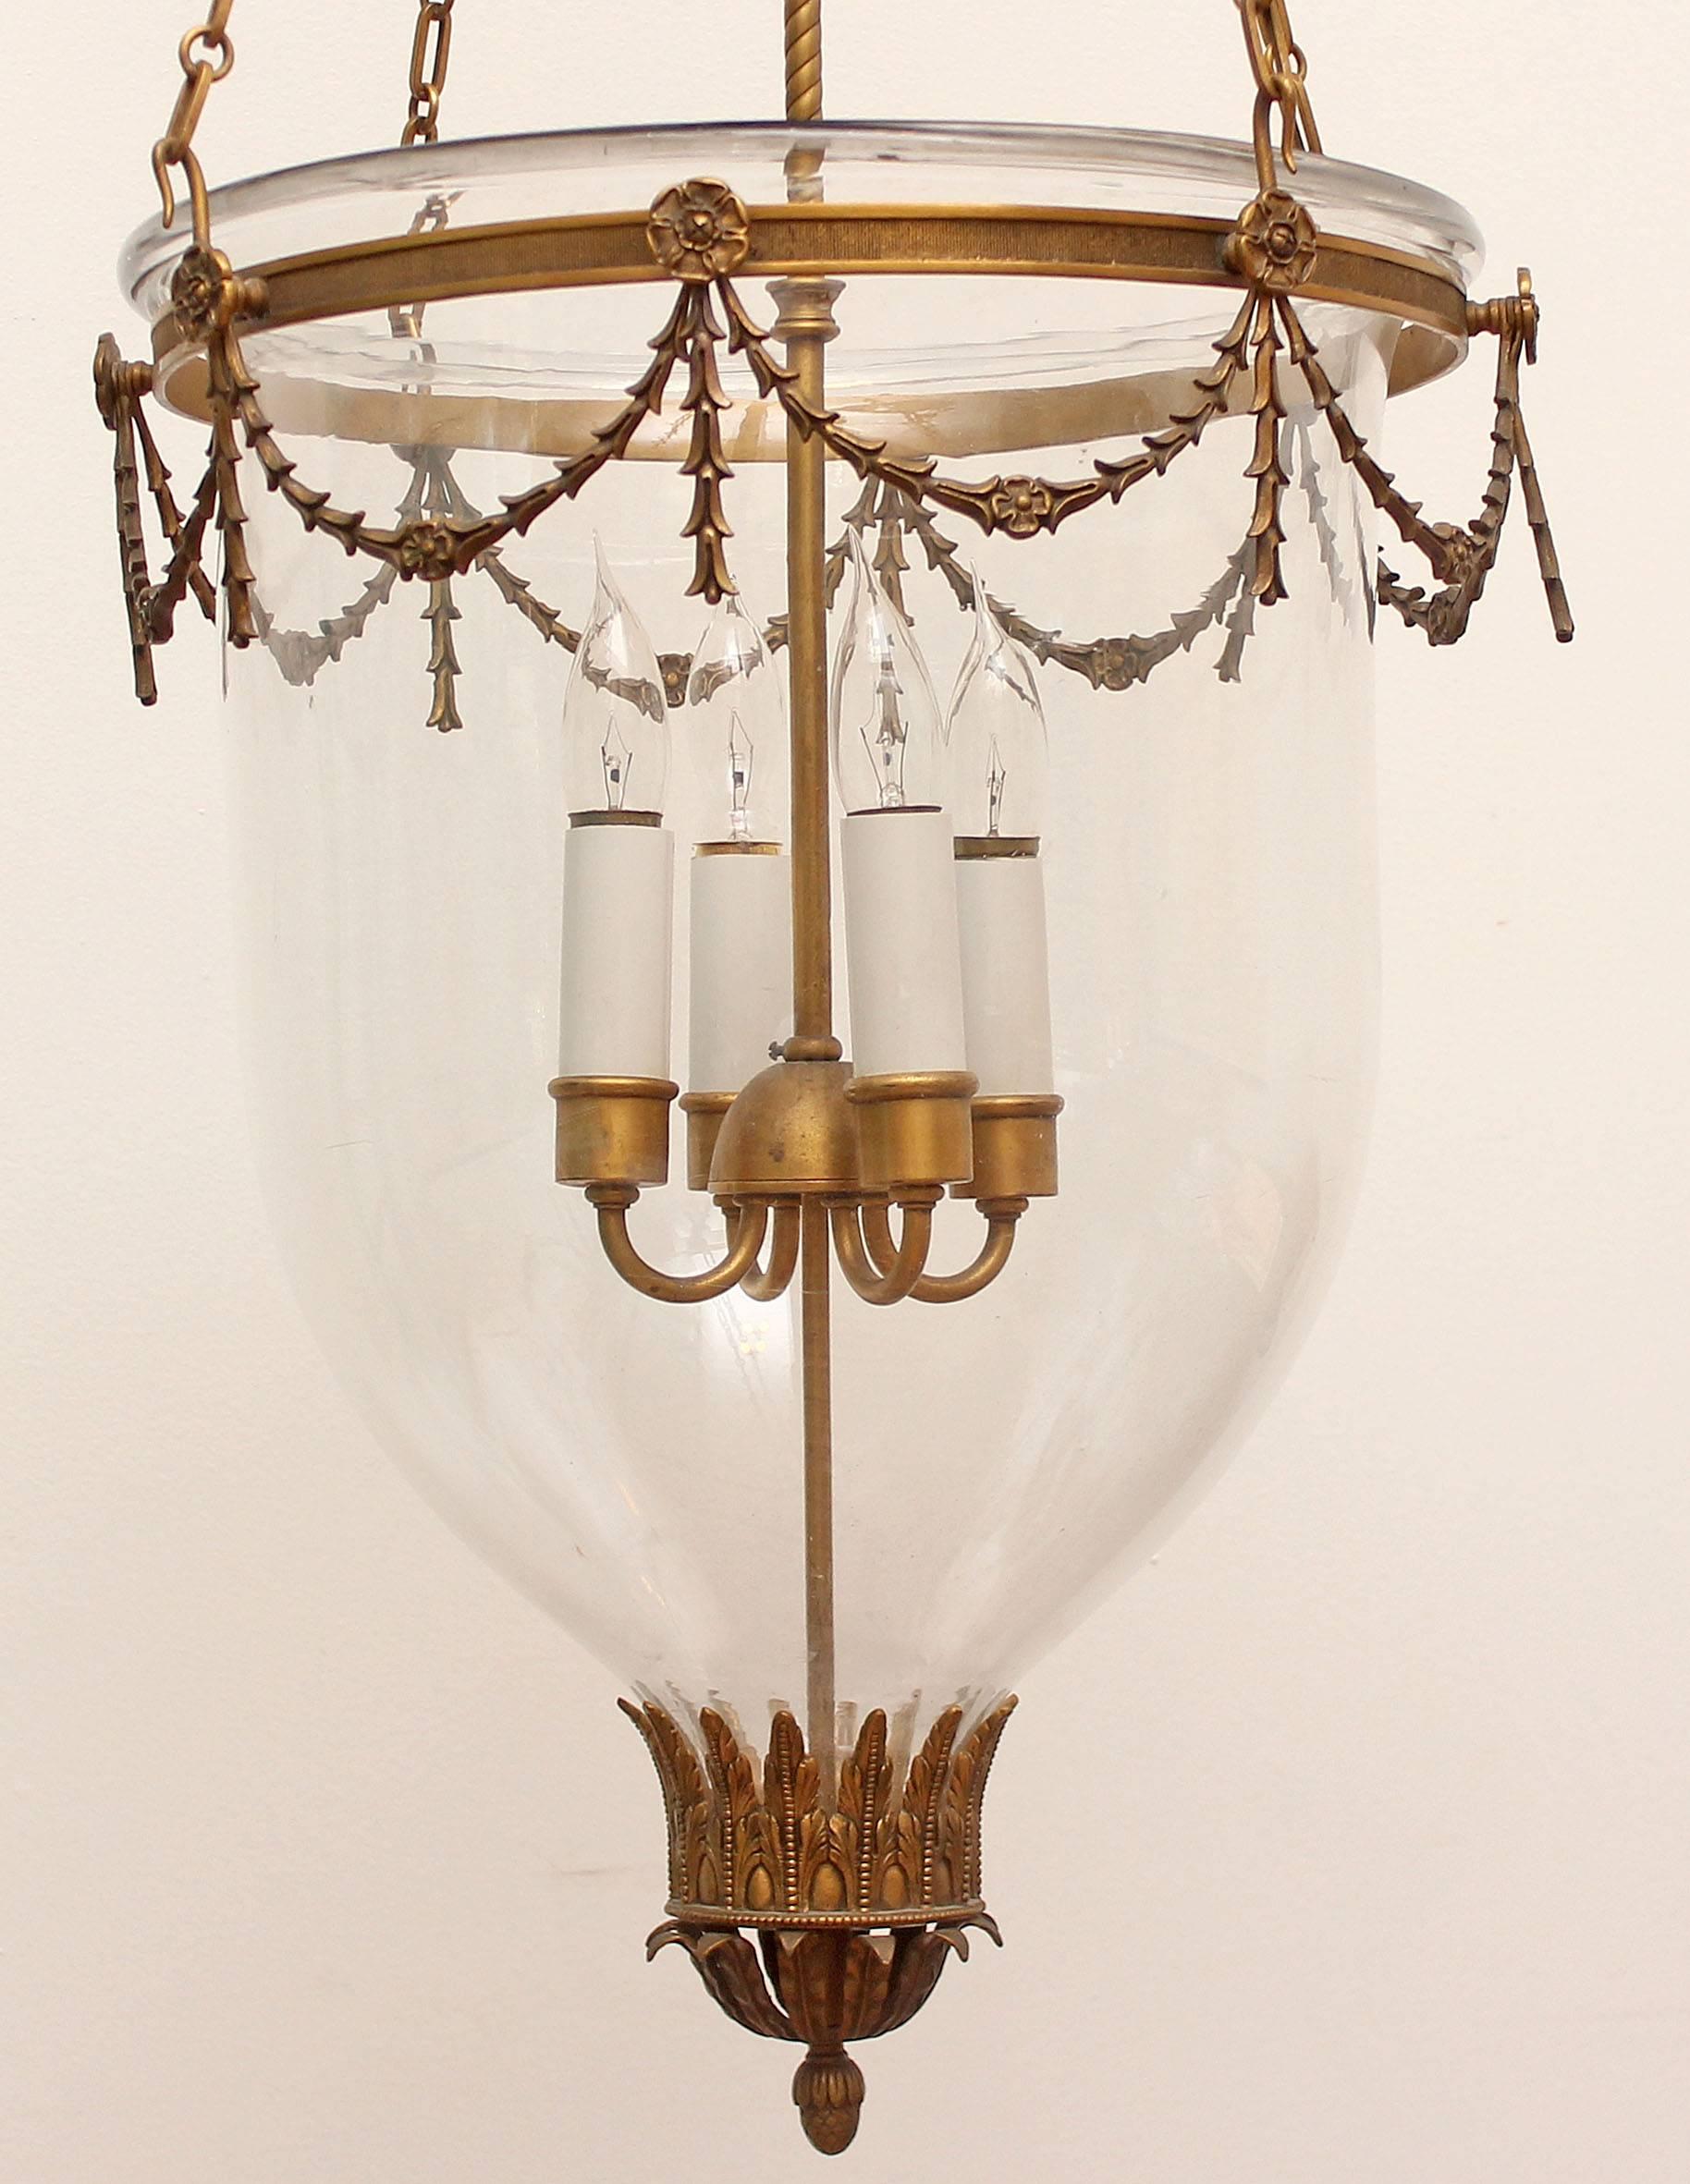 Fine large gilt bronze bell jar lantern hanging pendant light. Best quality. 30” of bronze chain. Attributed to E.F. Caldwell. Measure: 54